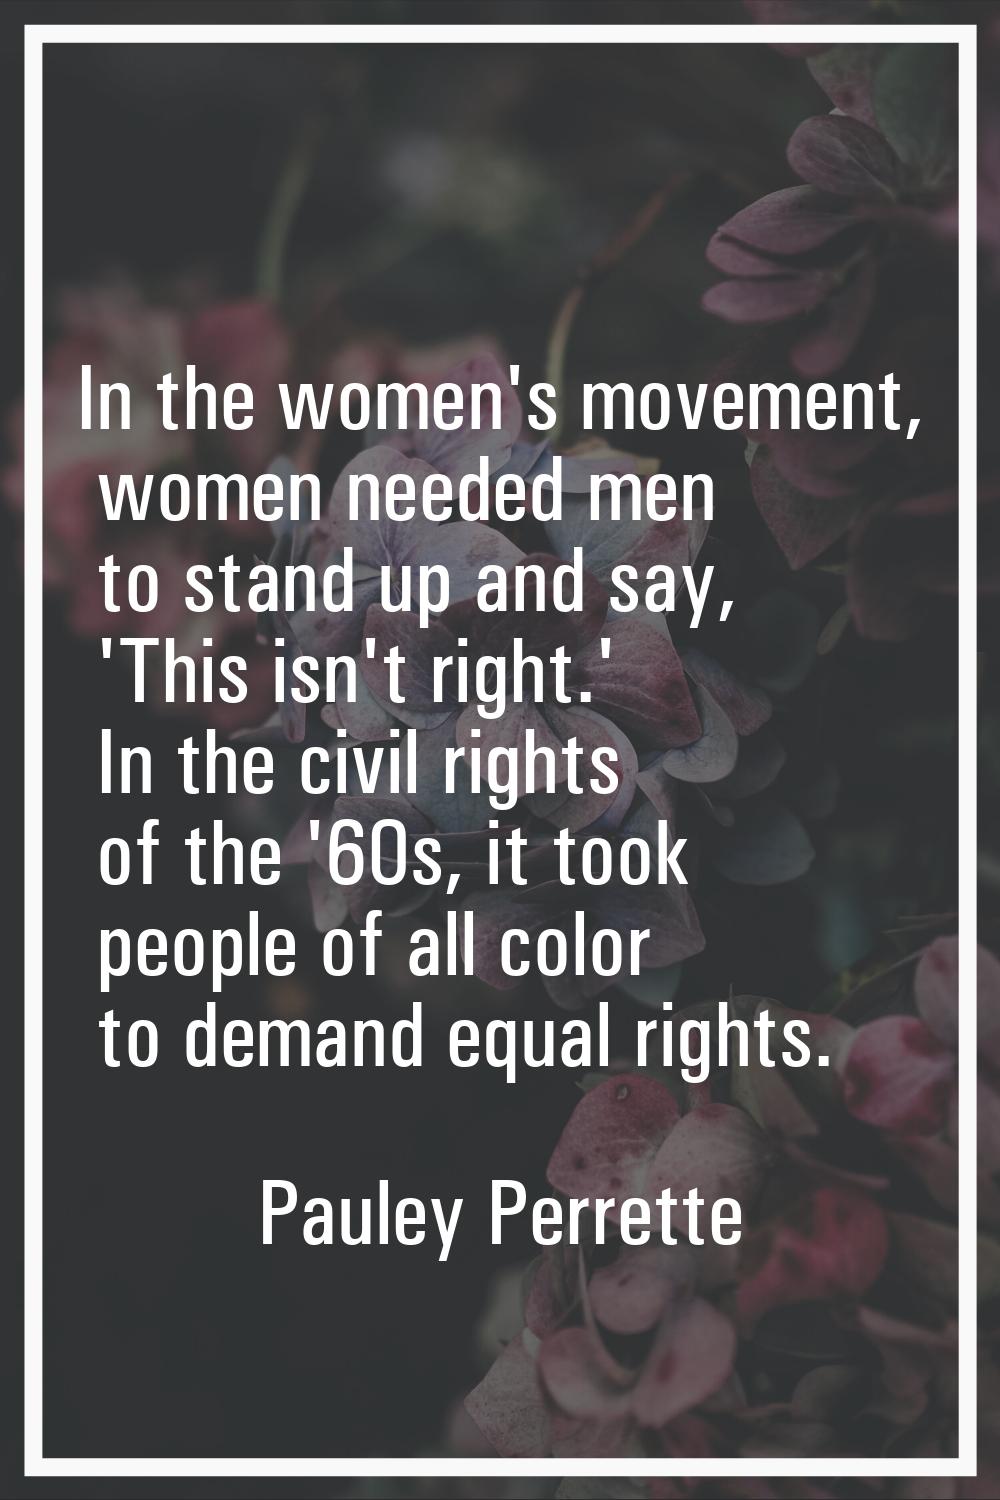 In the women's movement, women needed men to stand up and say, 'This isn't right.' In the civil rig